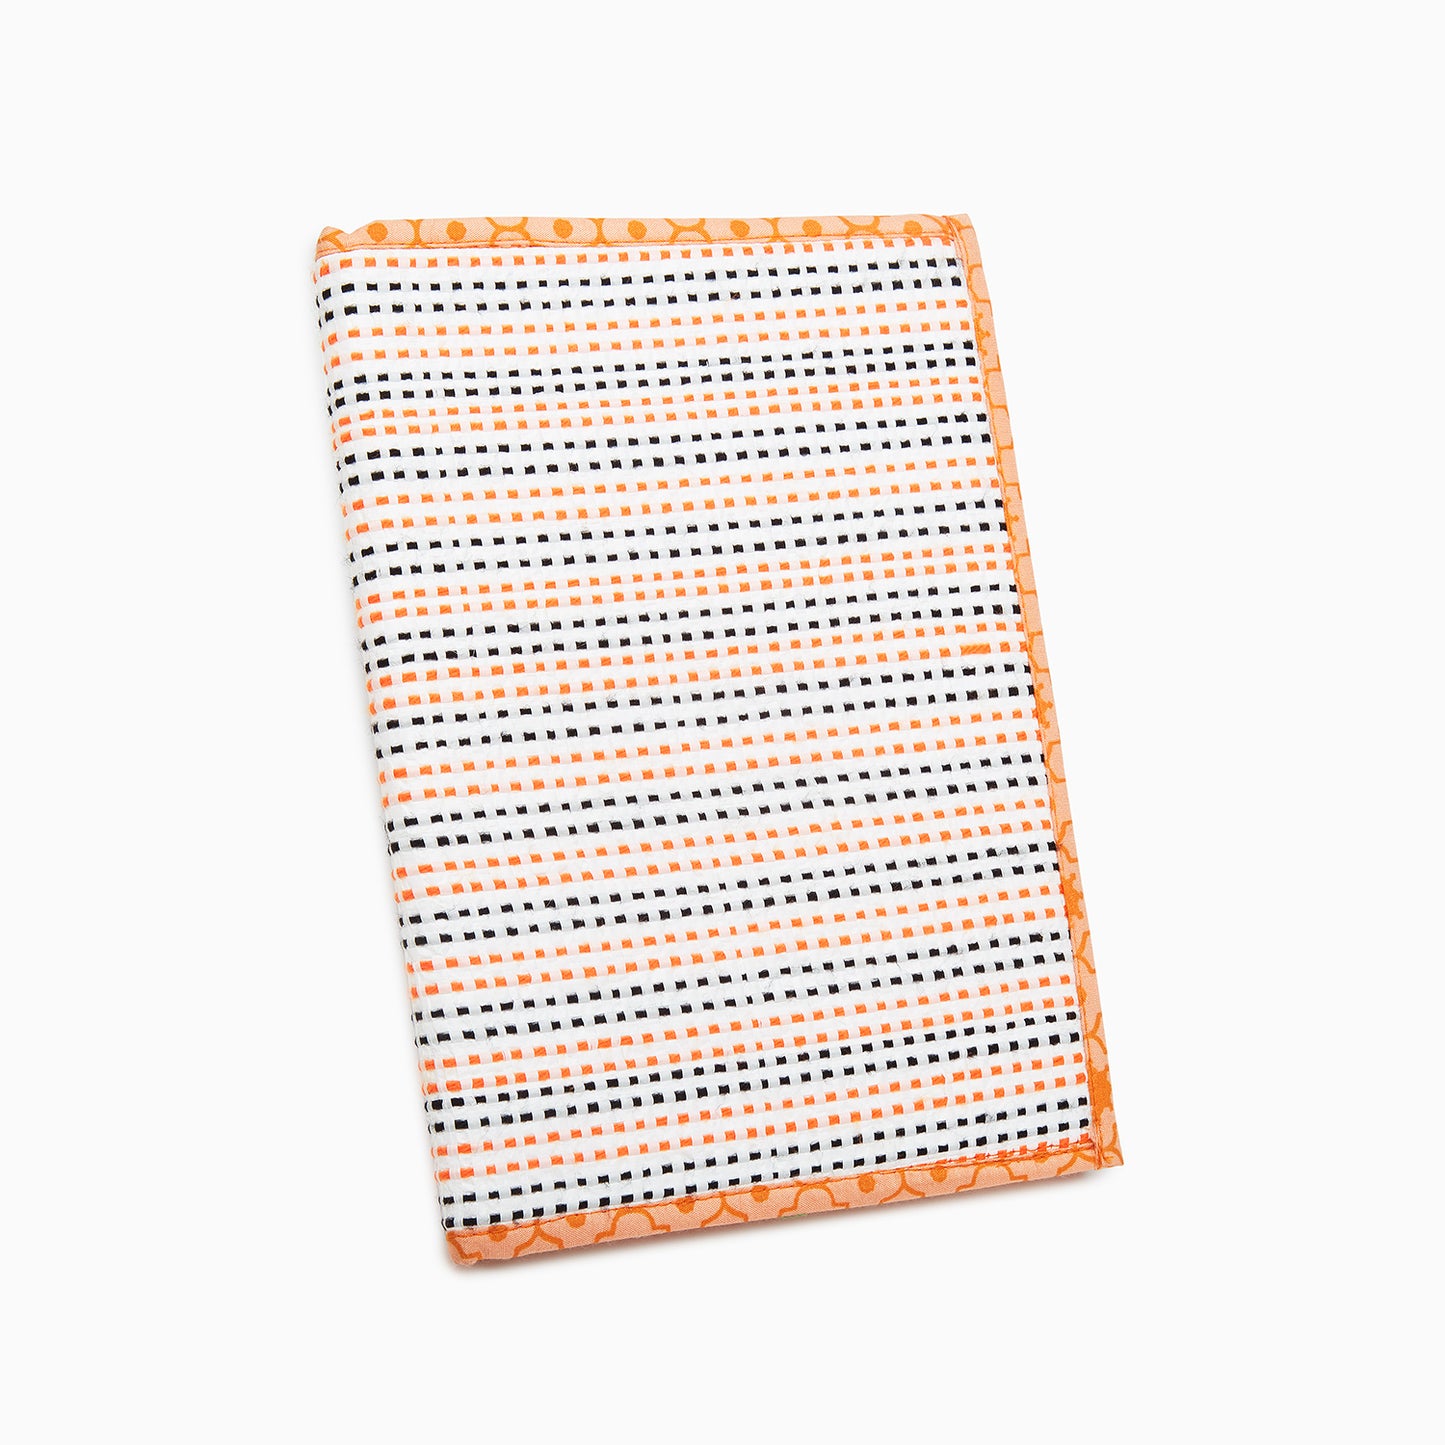 White Colored with Orange and Blue Design - Recycled Sack Cover with Diary